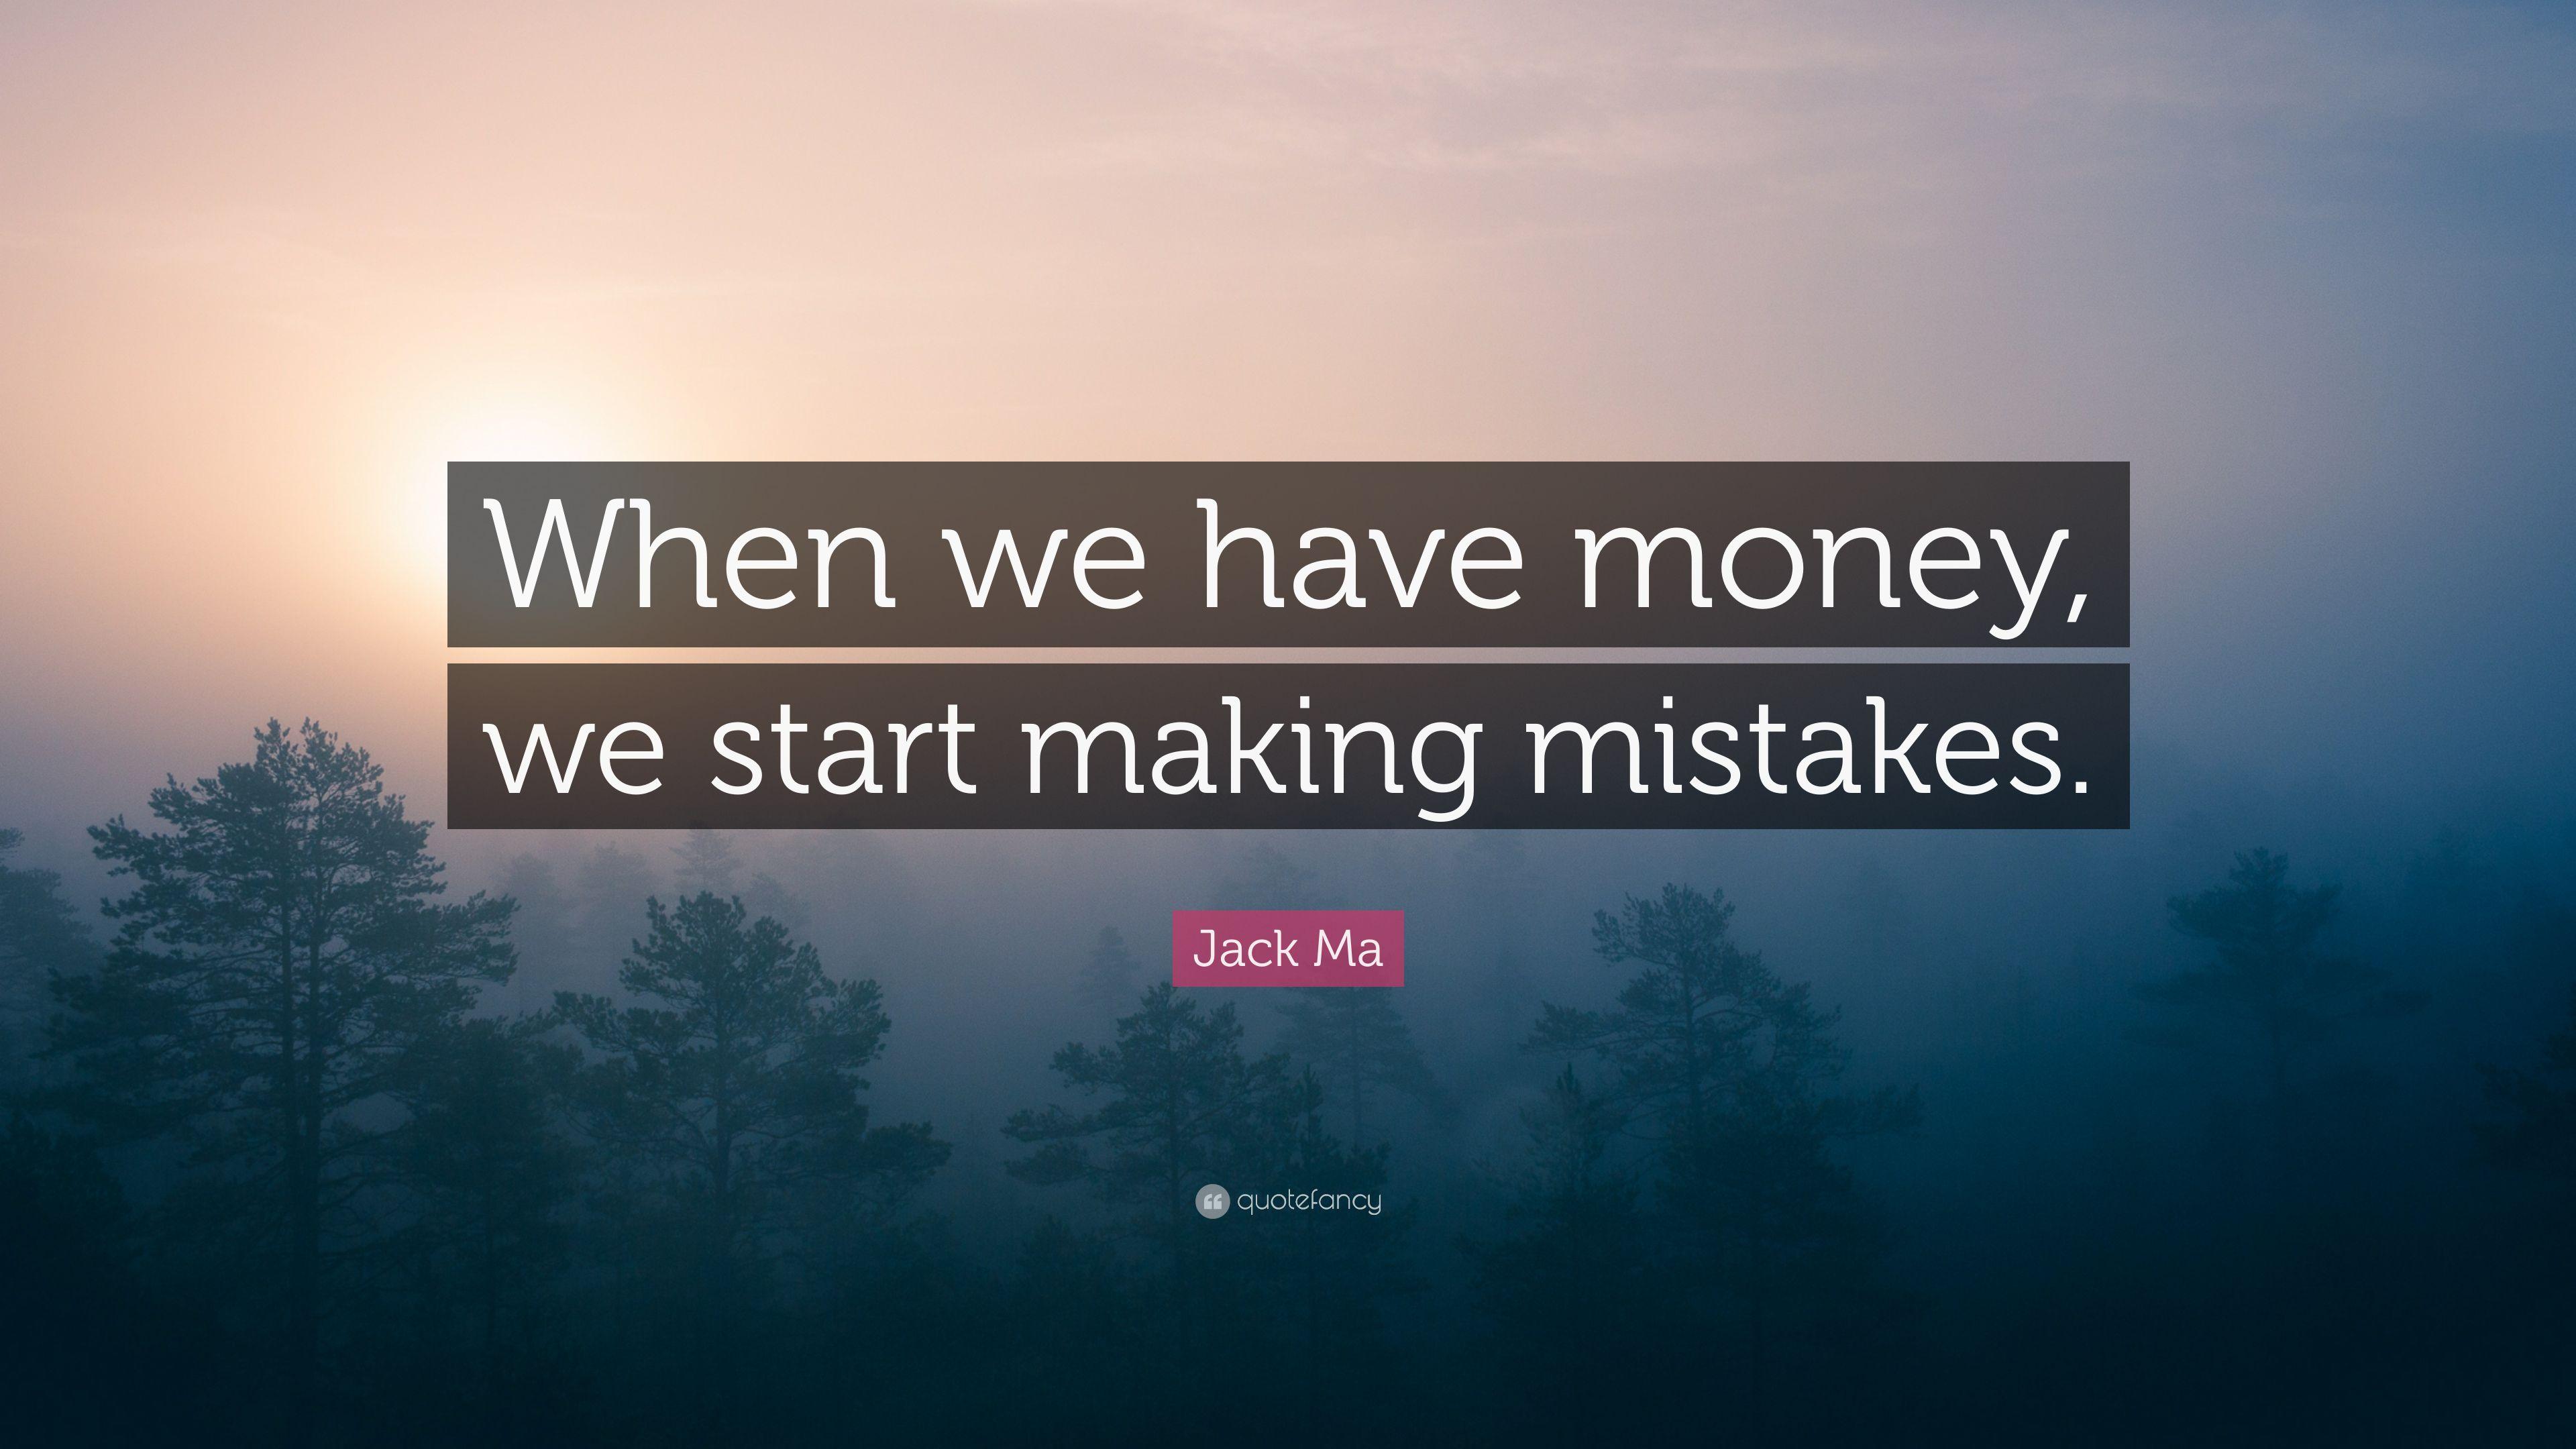 Jack Ma Quote: “When we have money, we start making mistakes.” 12